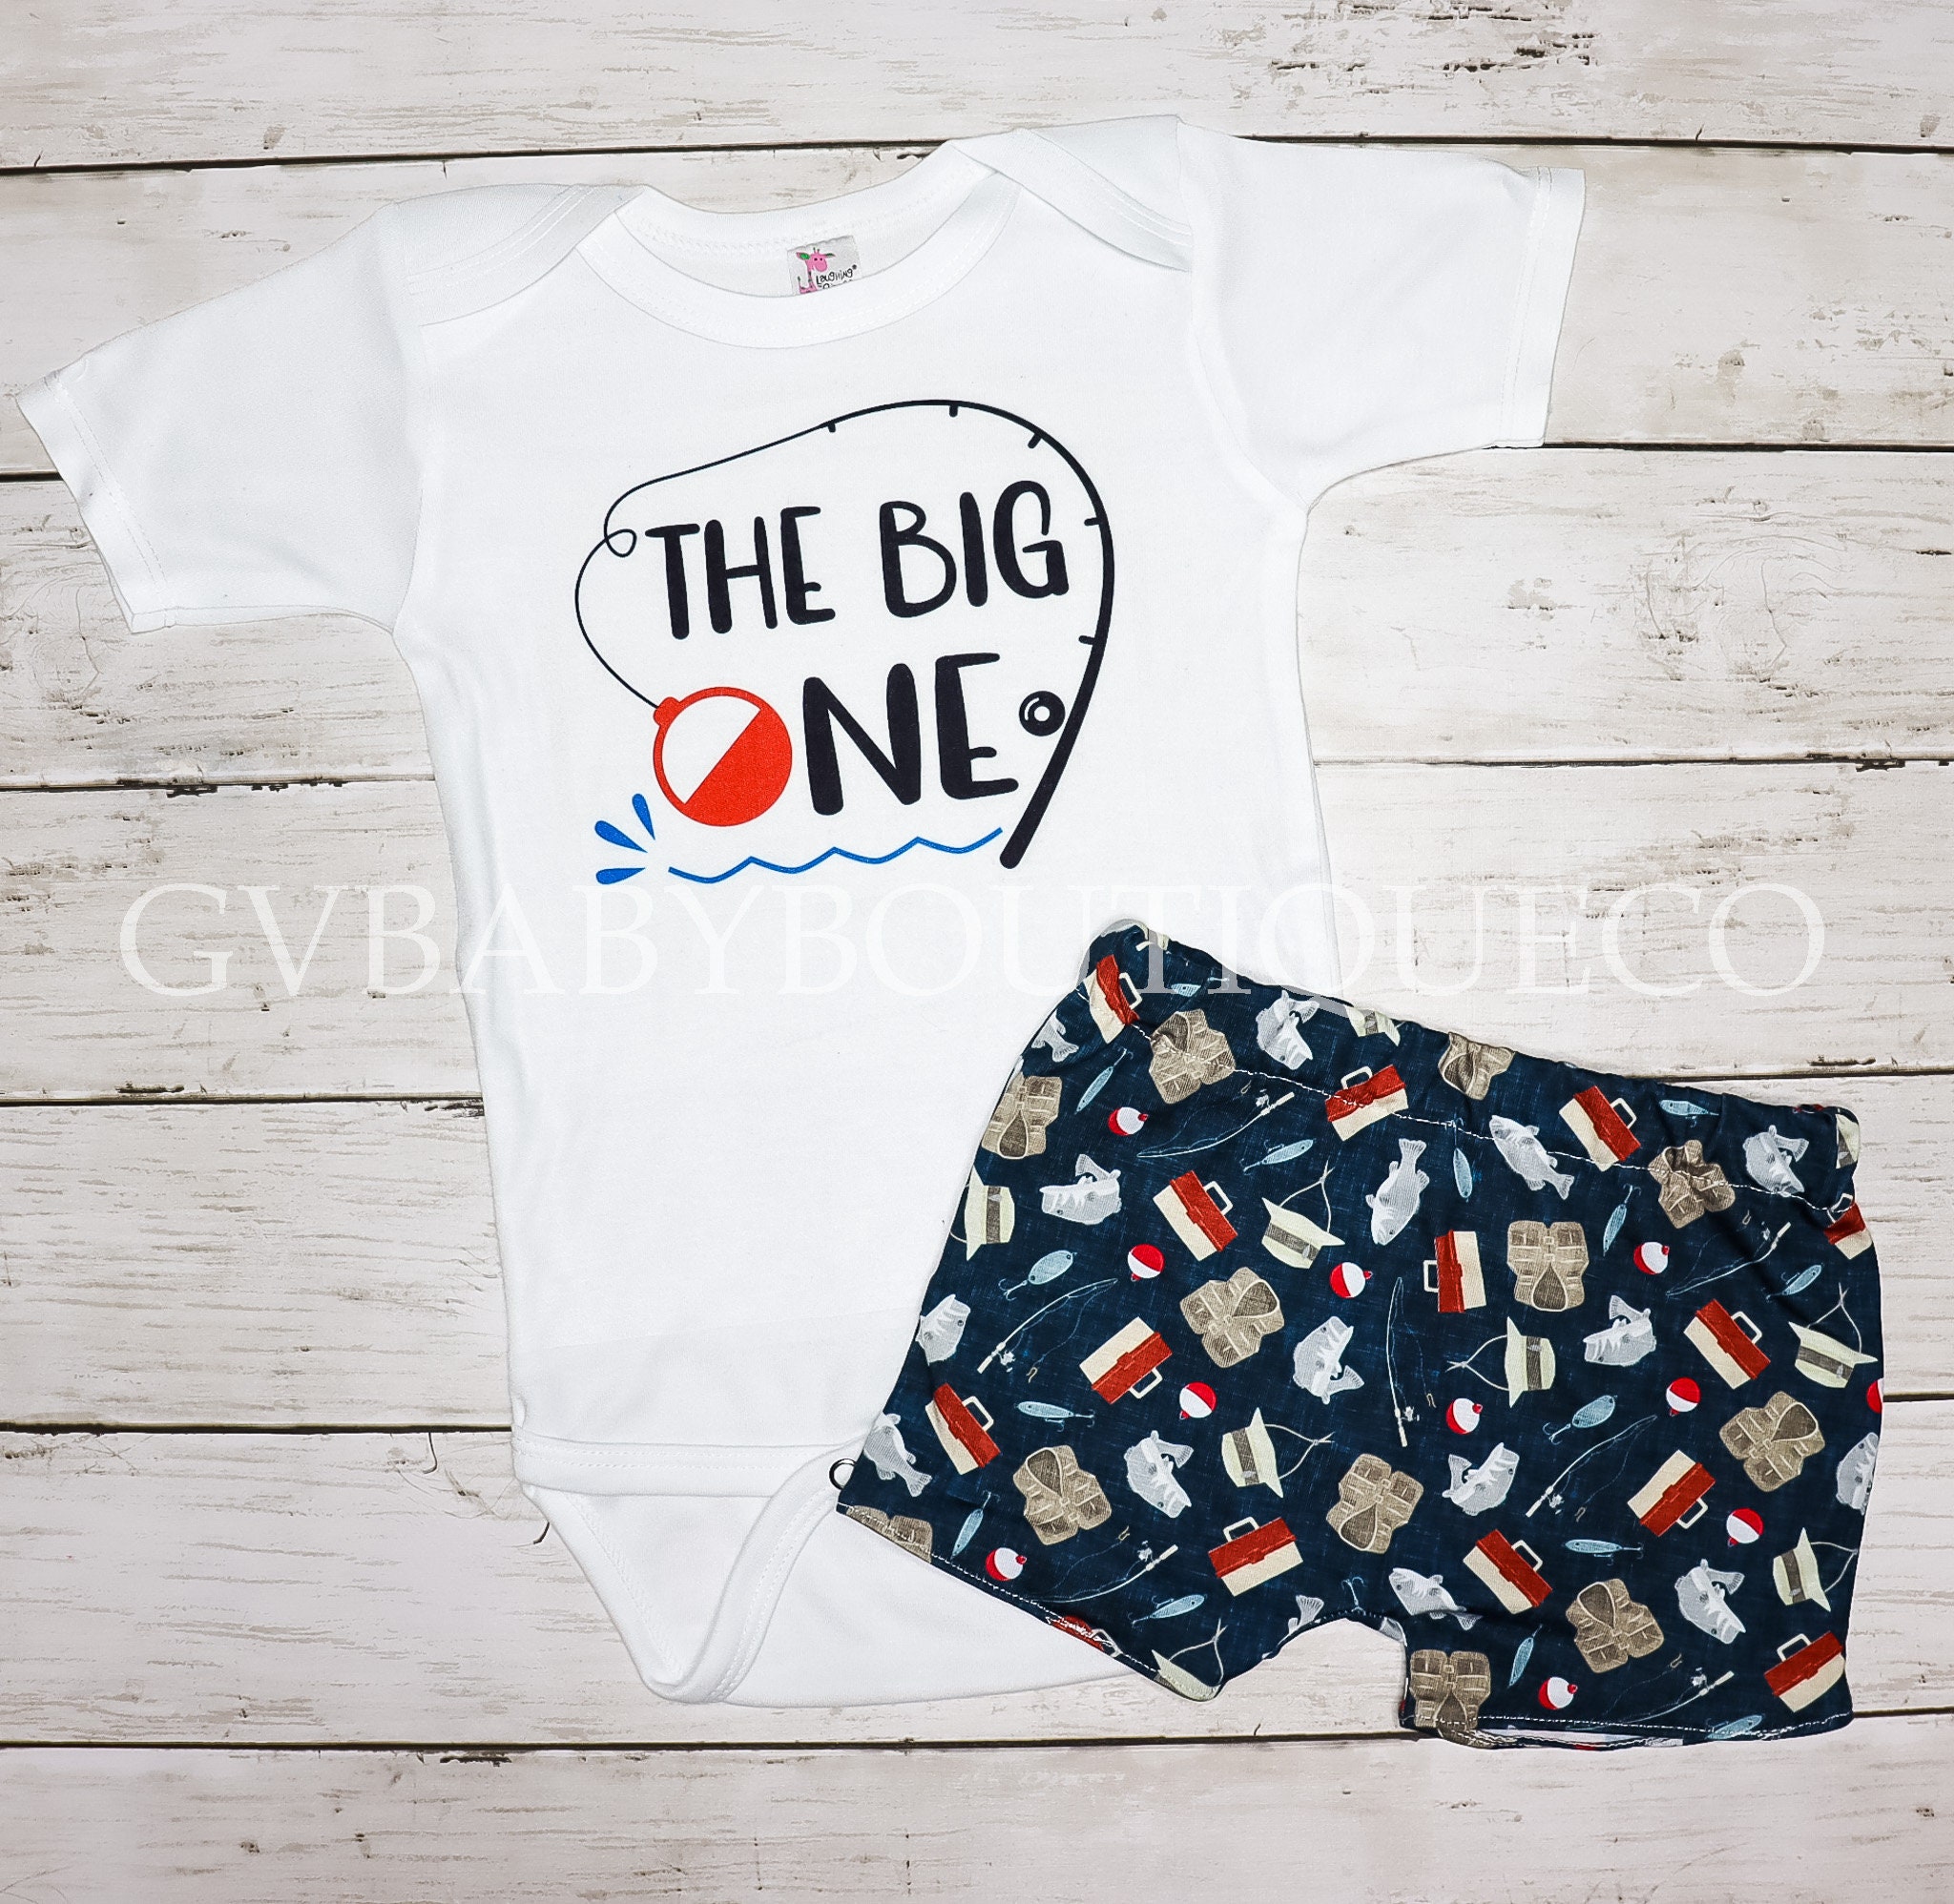 Boy First Birthday Fishing Outfit, Bodysuit and Fishing Gear Shorts Set,  Boys Big One First Birthday Outfit, Big One Fishing Birthday Party 